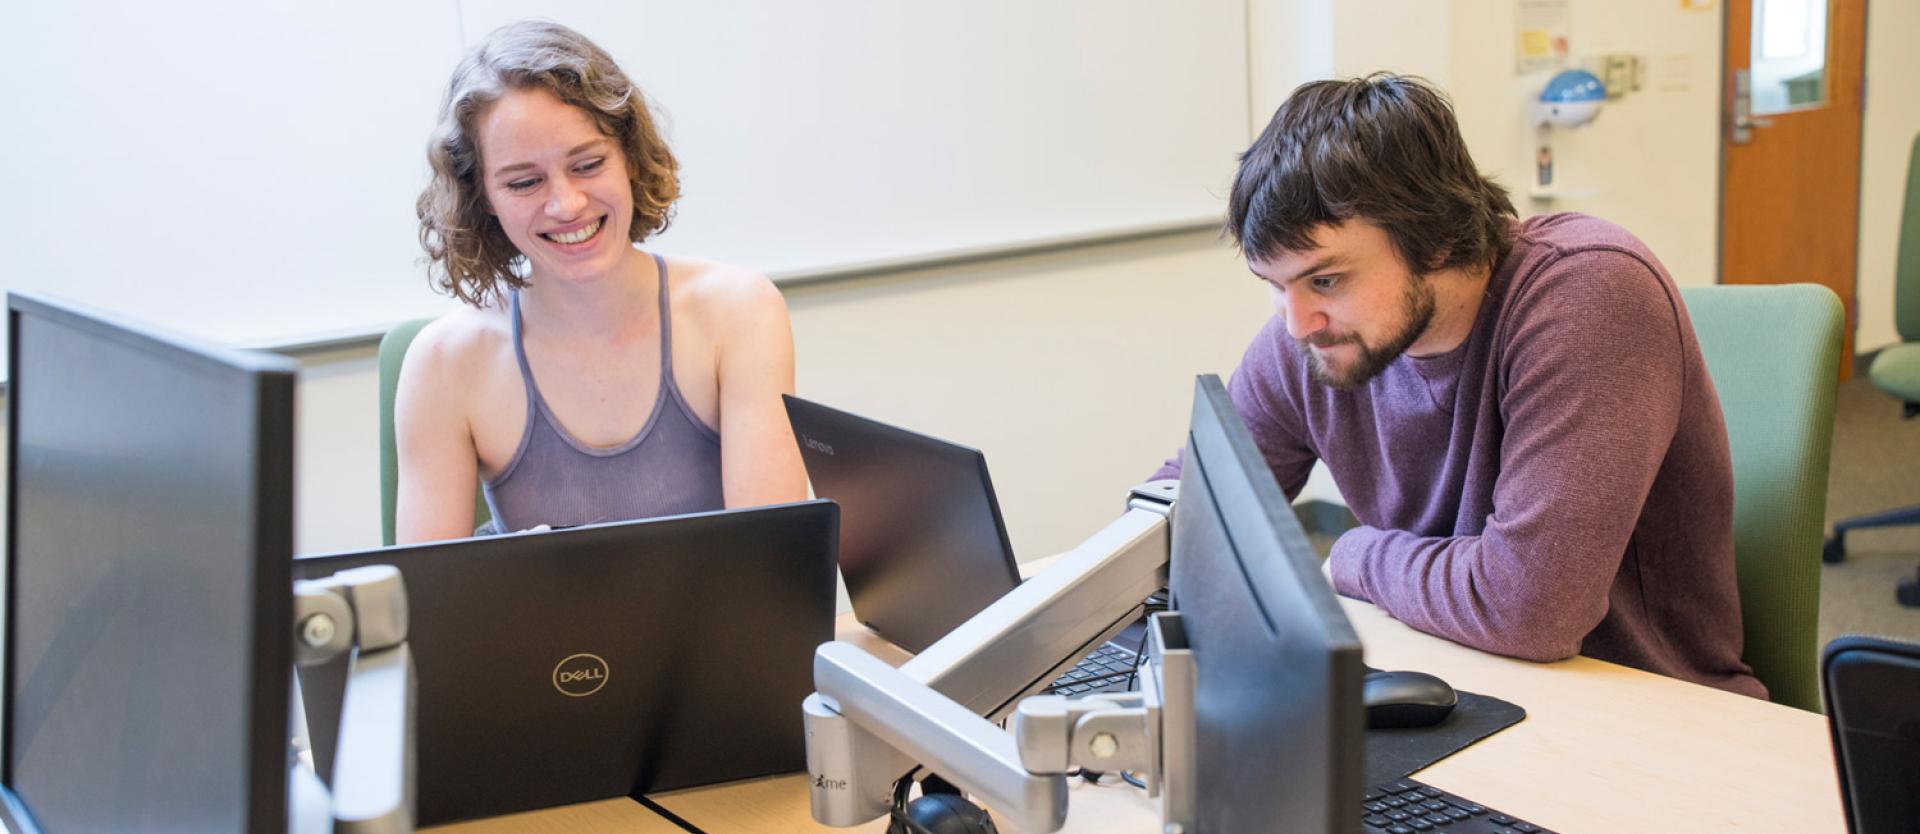 two students sitting next to a computer smiling